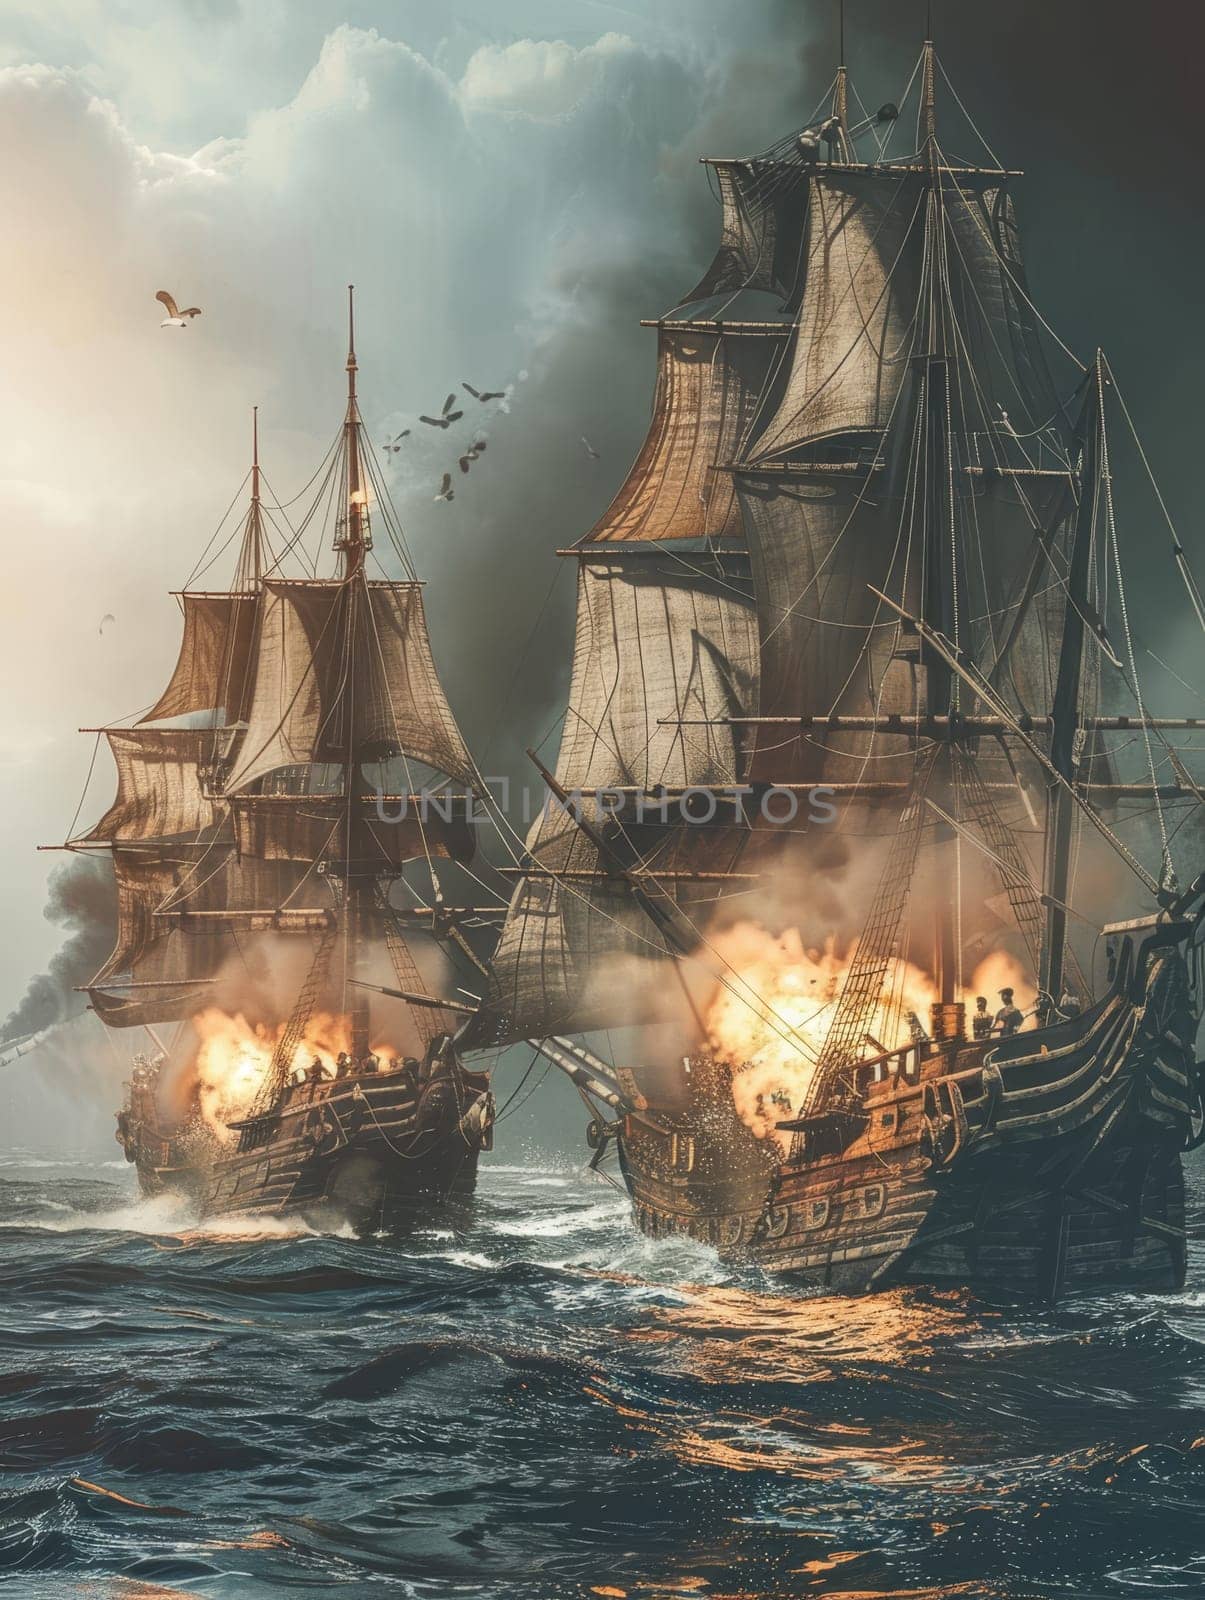 An epic naval battle scene featuring grand sailing ships amidst cannon fire and dramatic skies, invoking historical maritime warfare